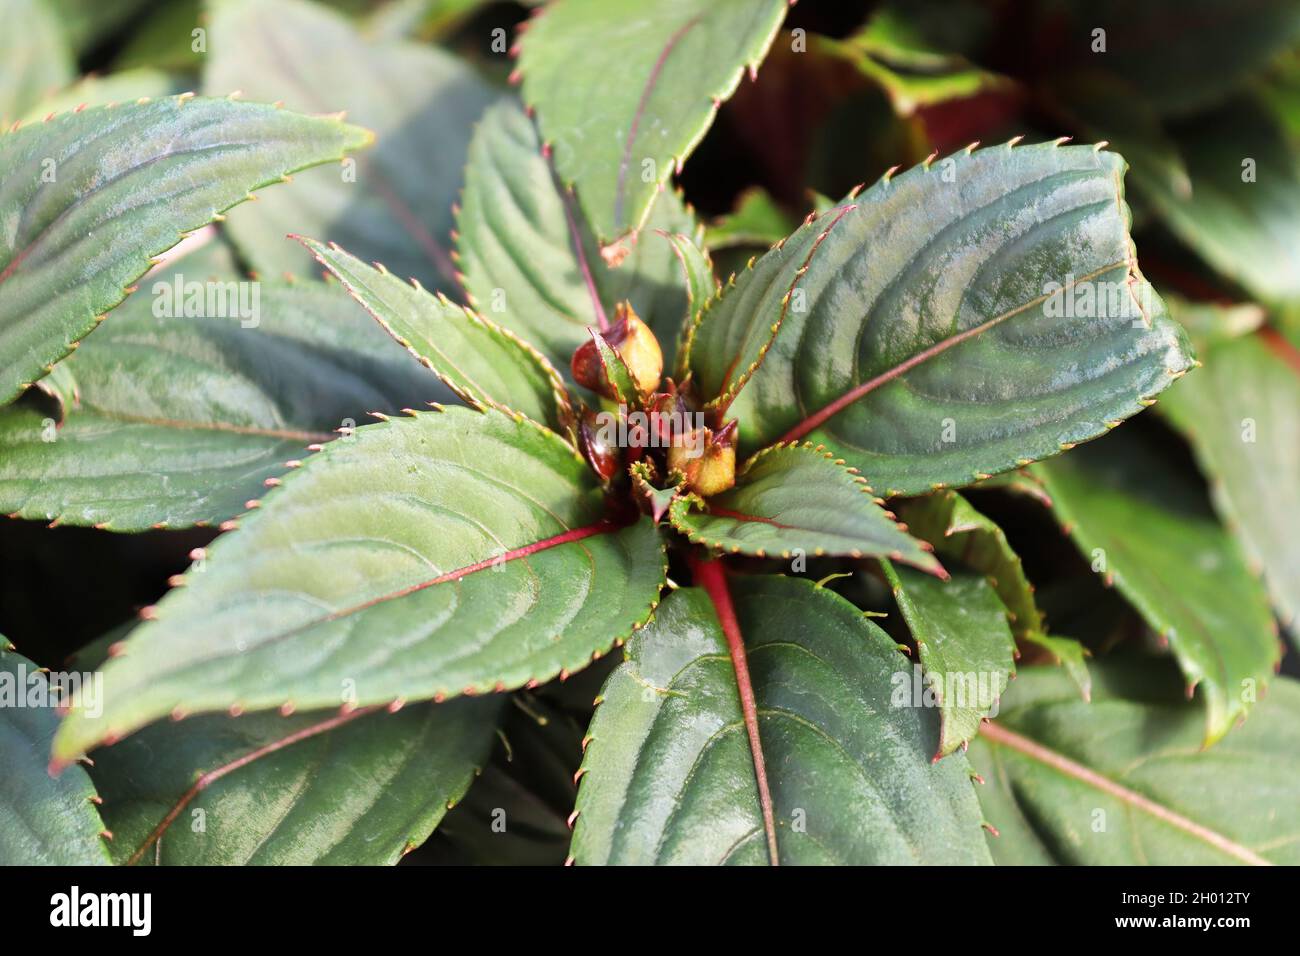 Tiny buds on inpatien flower plants about to bloom Stock Photo